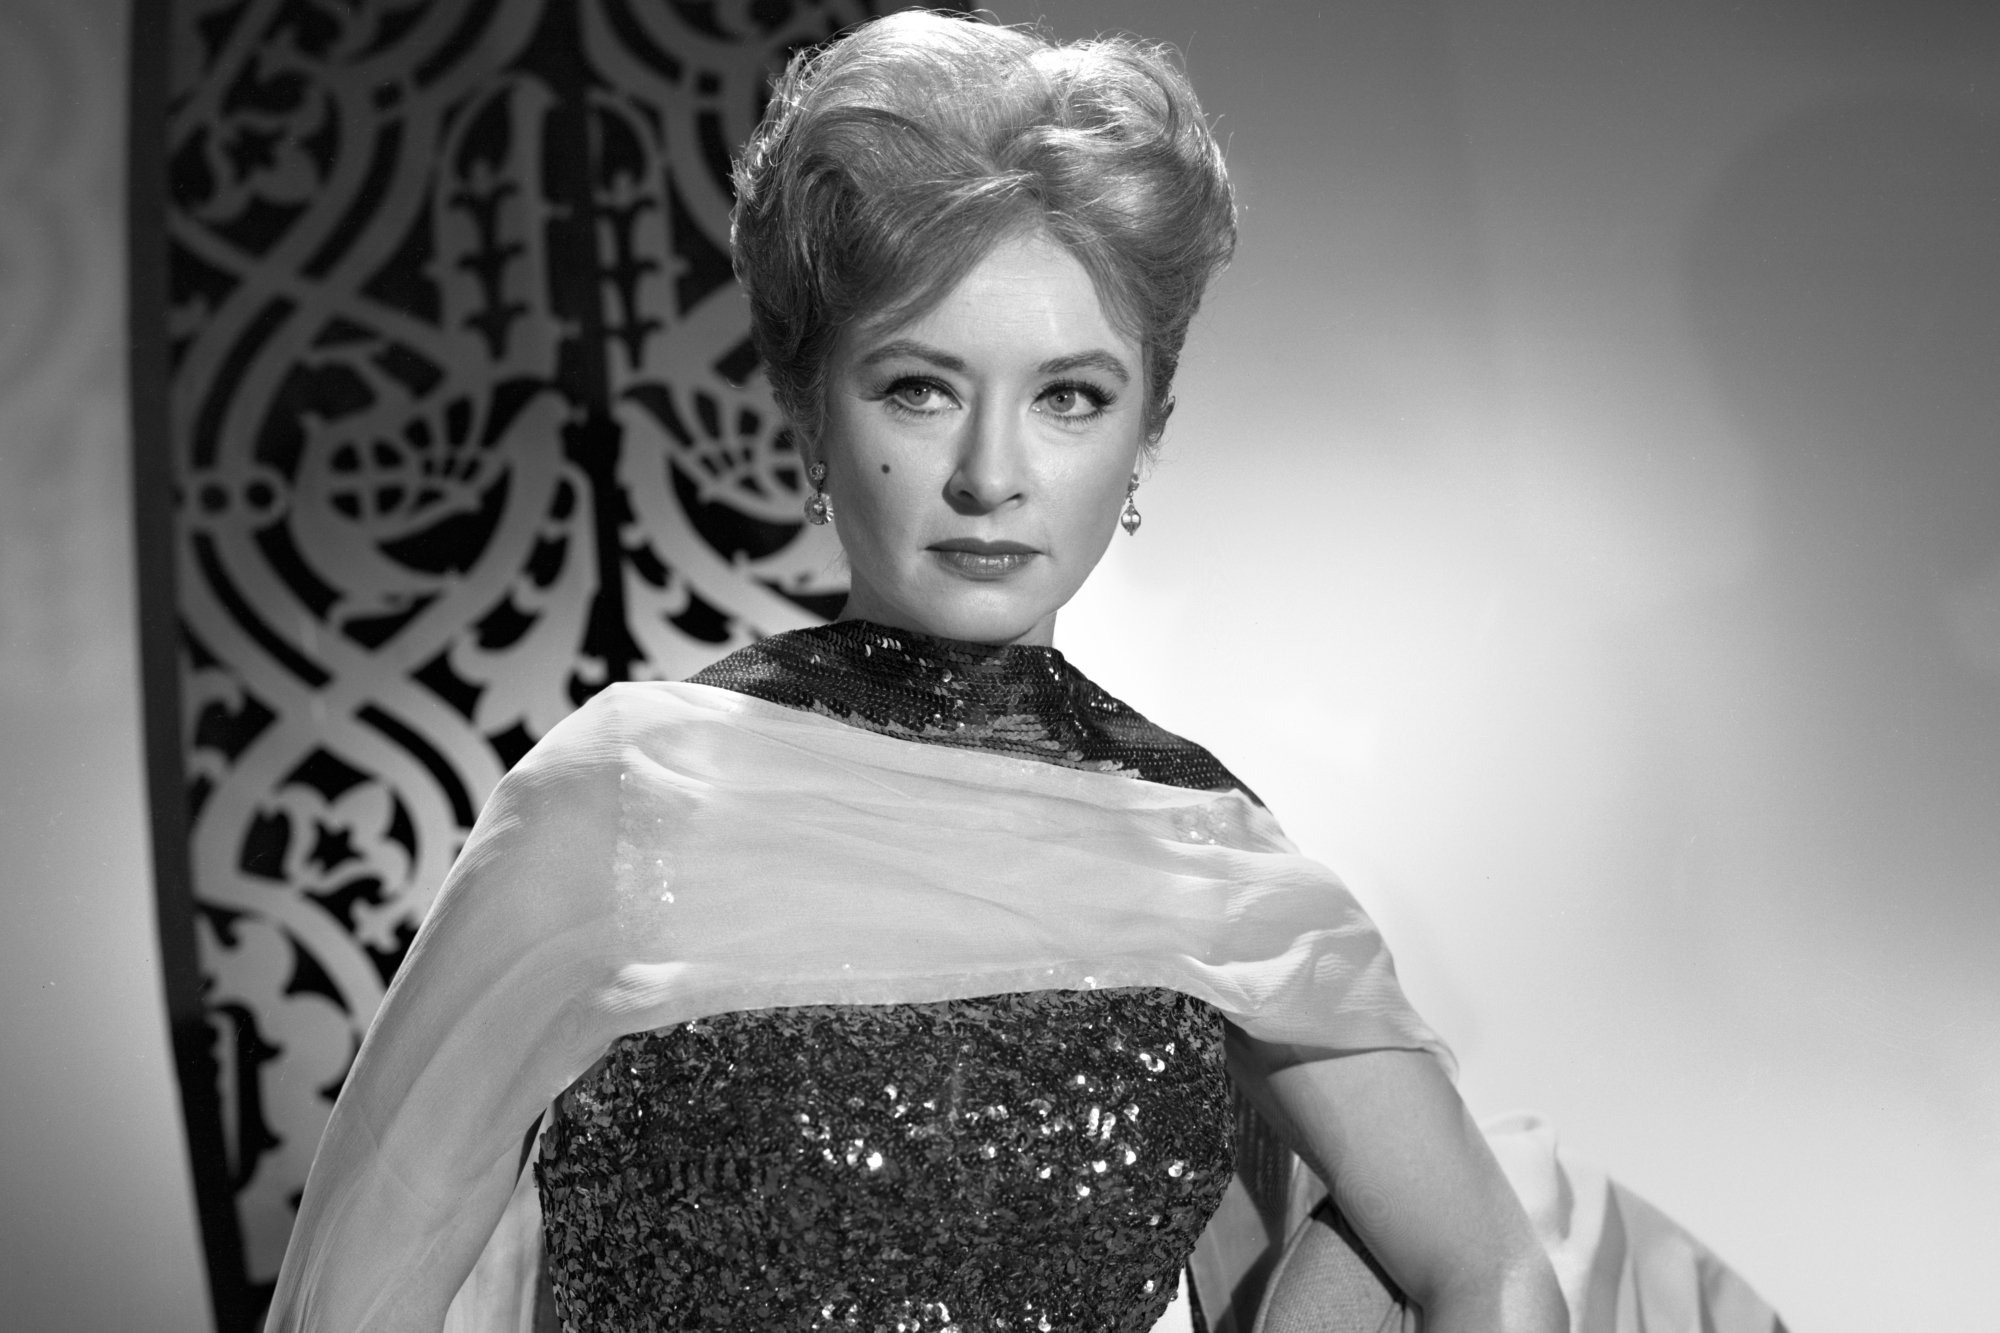 'Gunsmoke' Amanda Blake as Miss Kitty Russell in a black-and-white promo picture looking off to the side